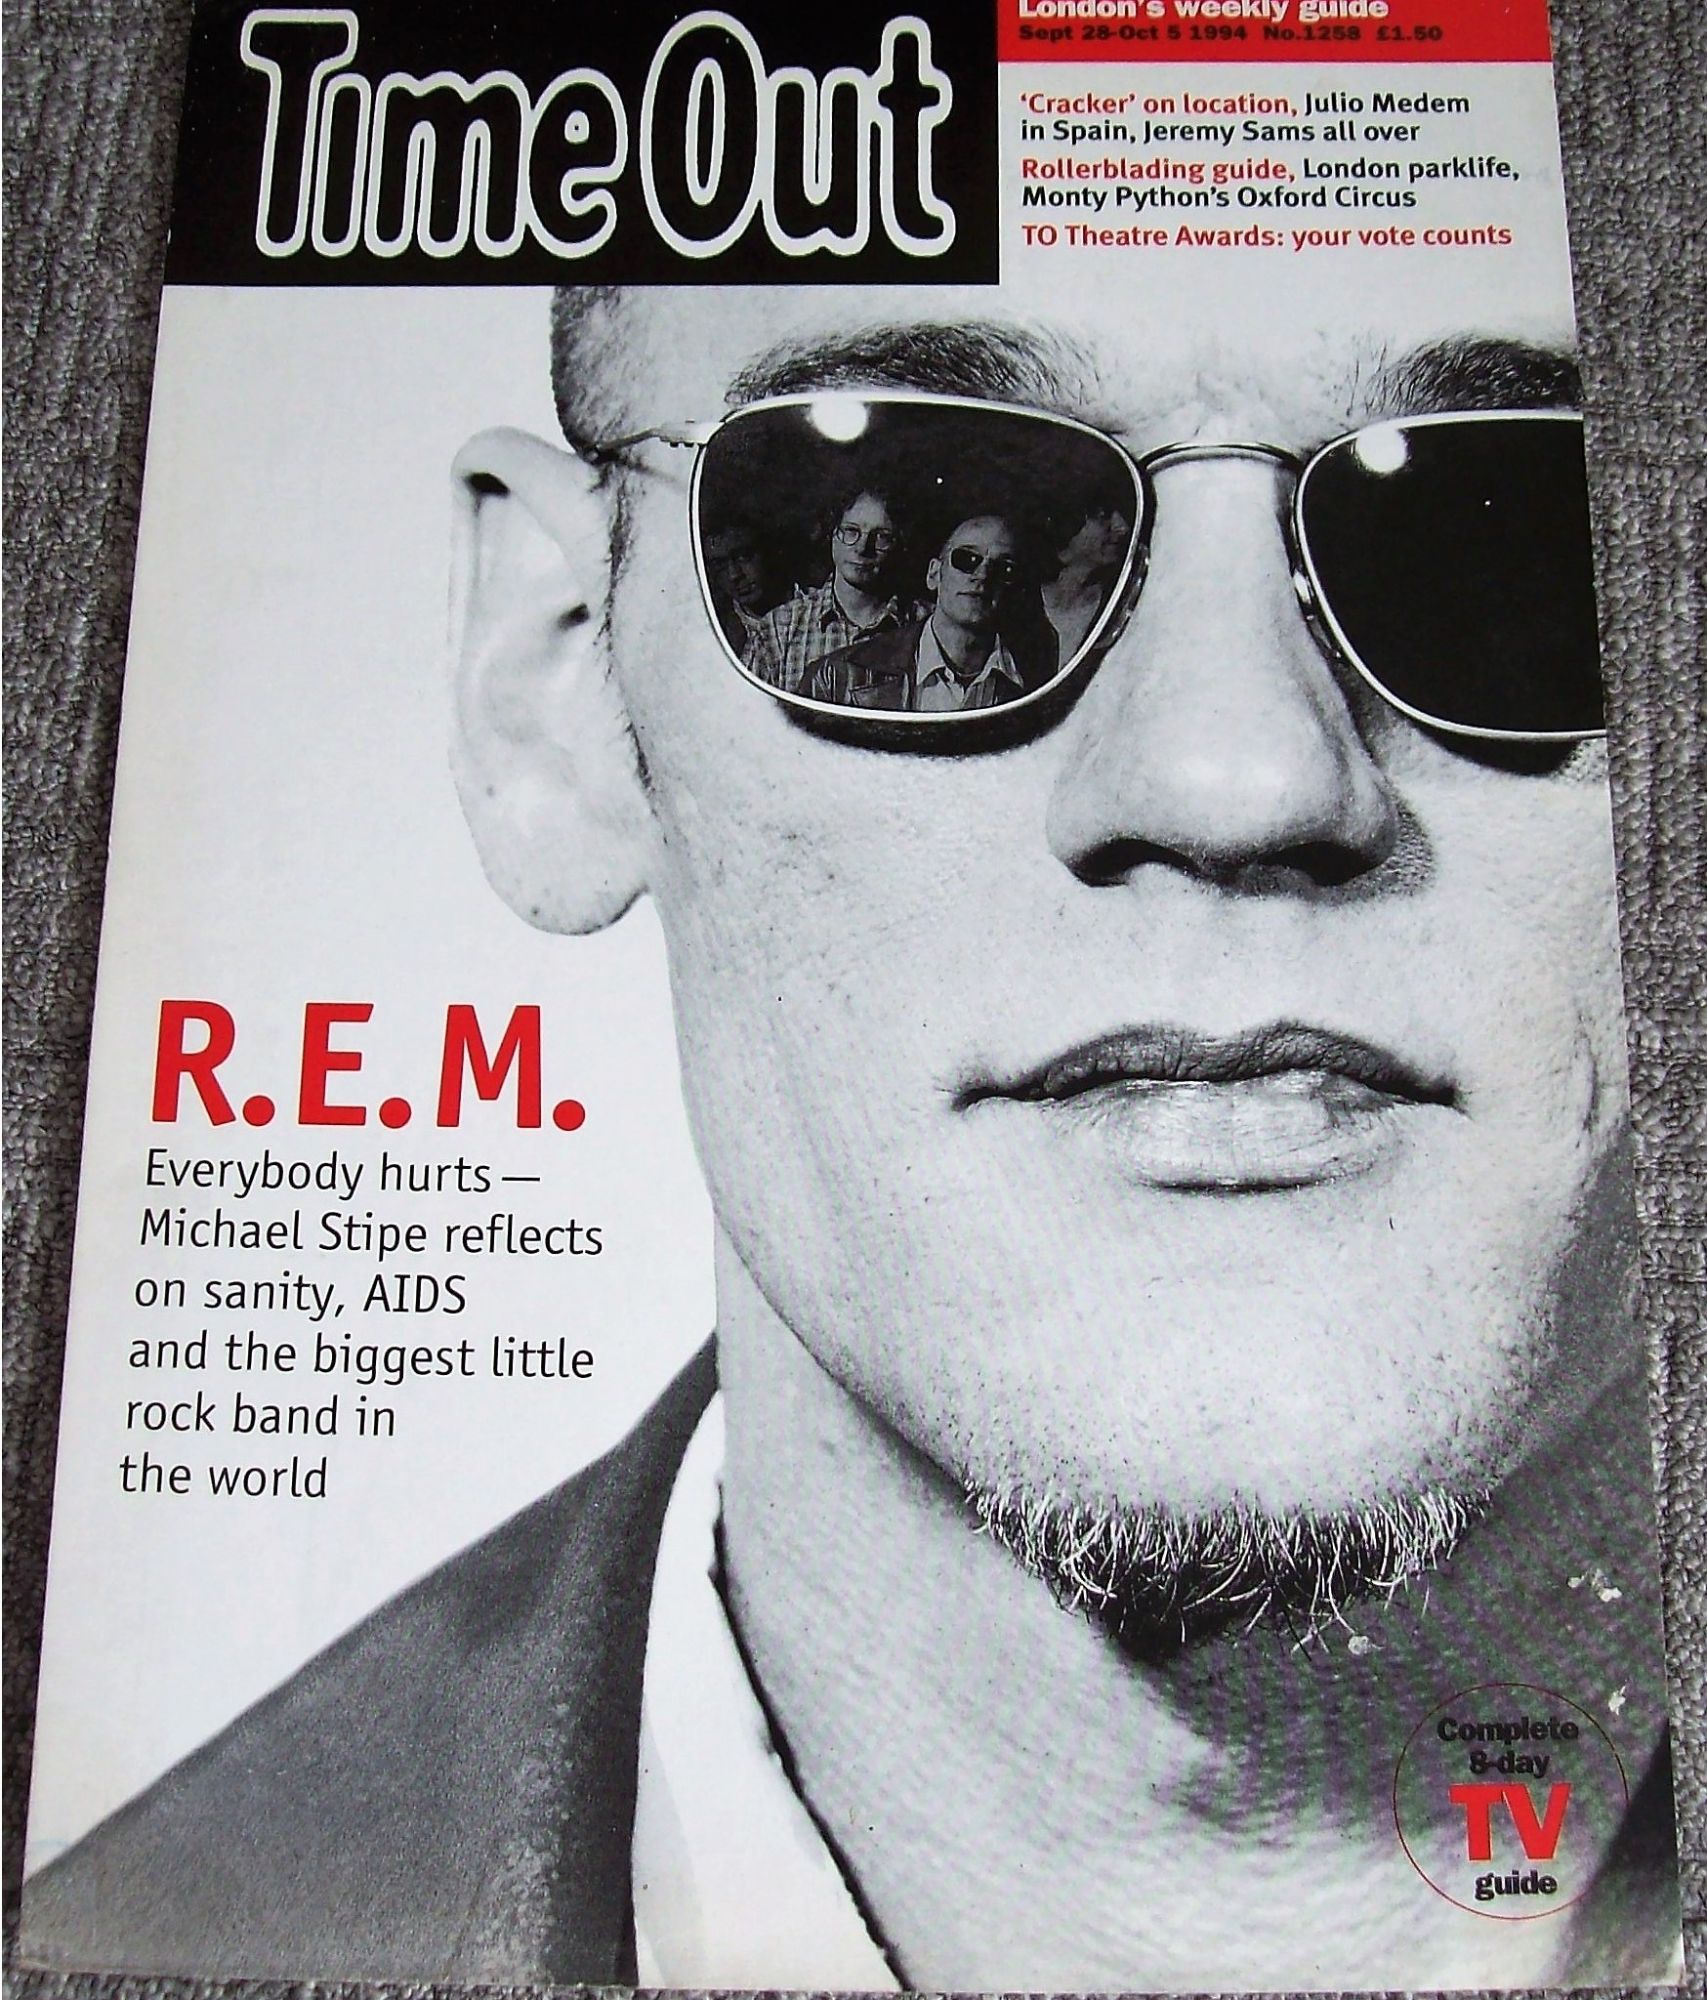 REM U.K. ADVERTISING BOARD FOR 'TIME OUT' MAGAZINE SEPT-OCT 1994